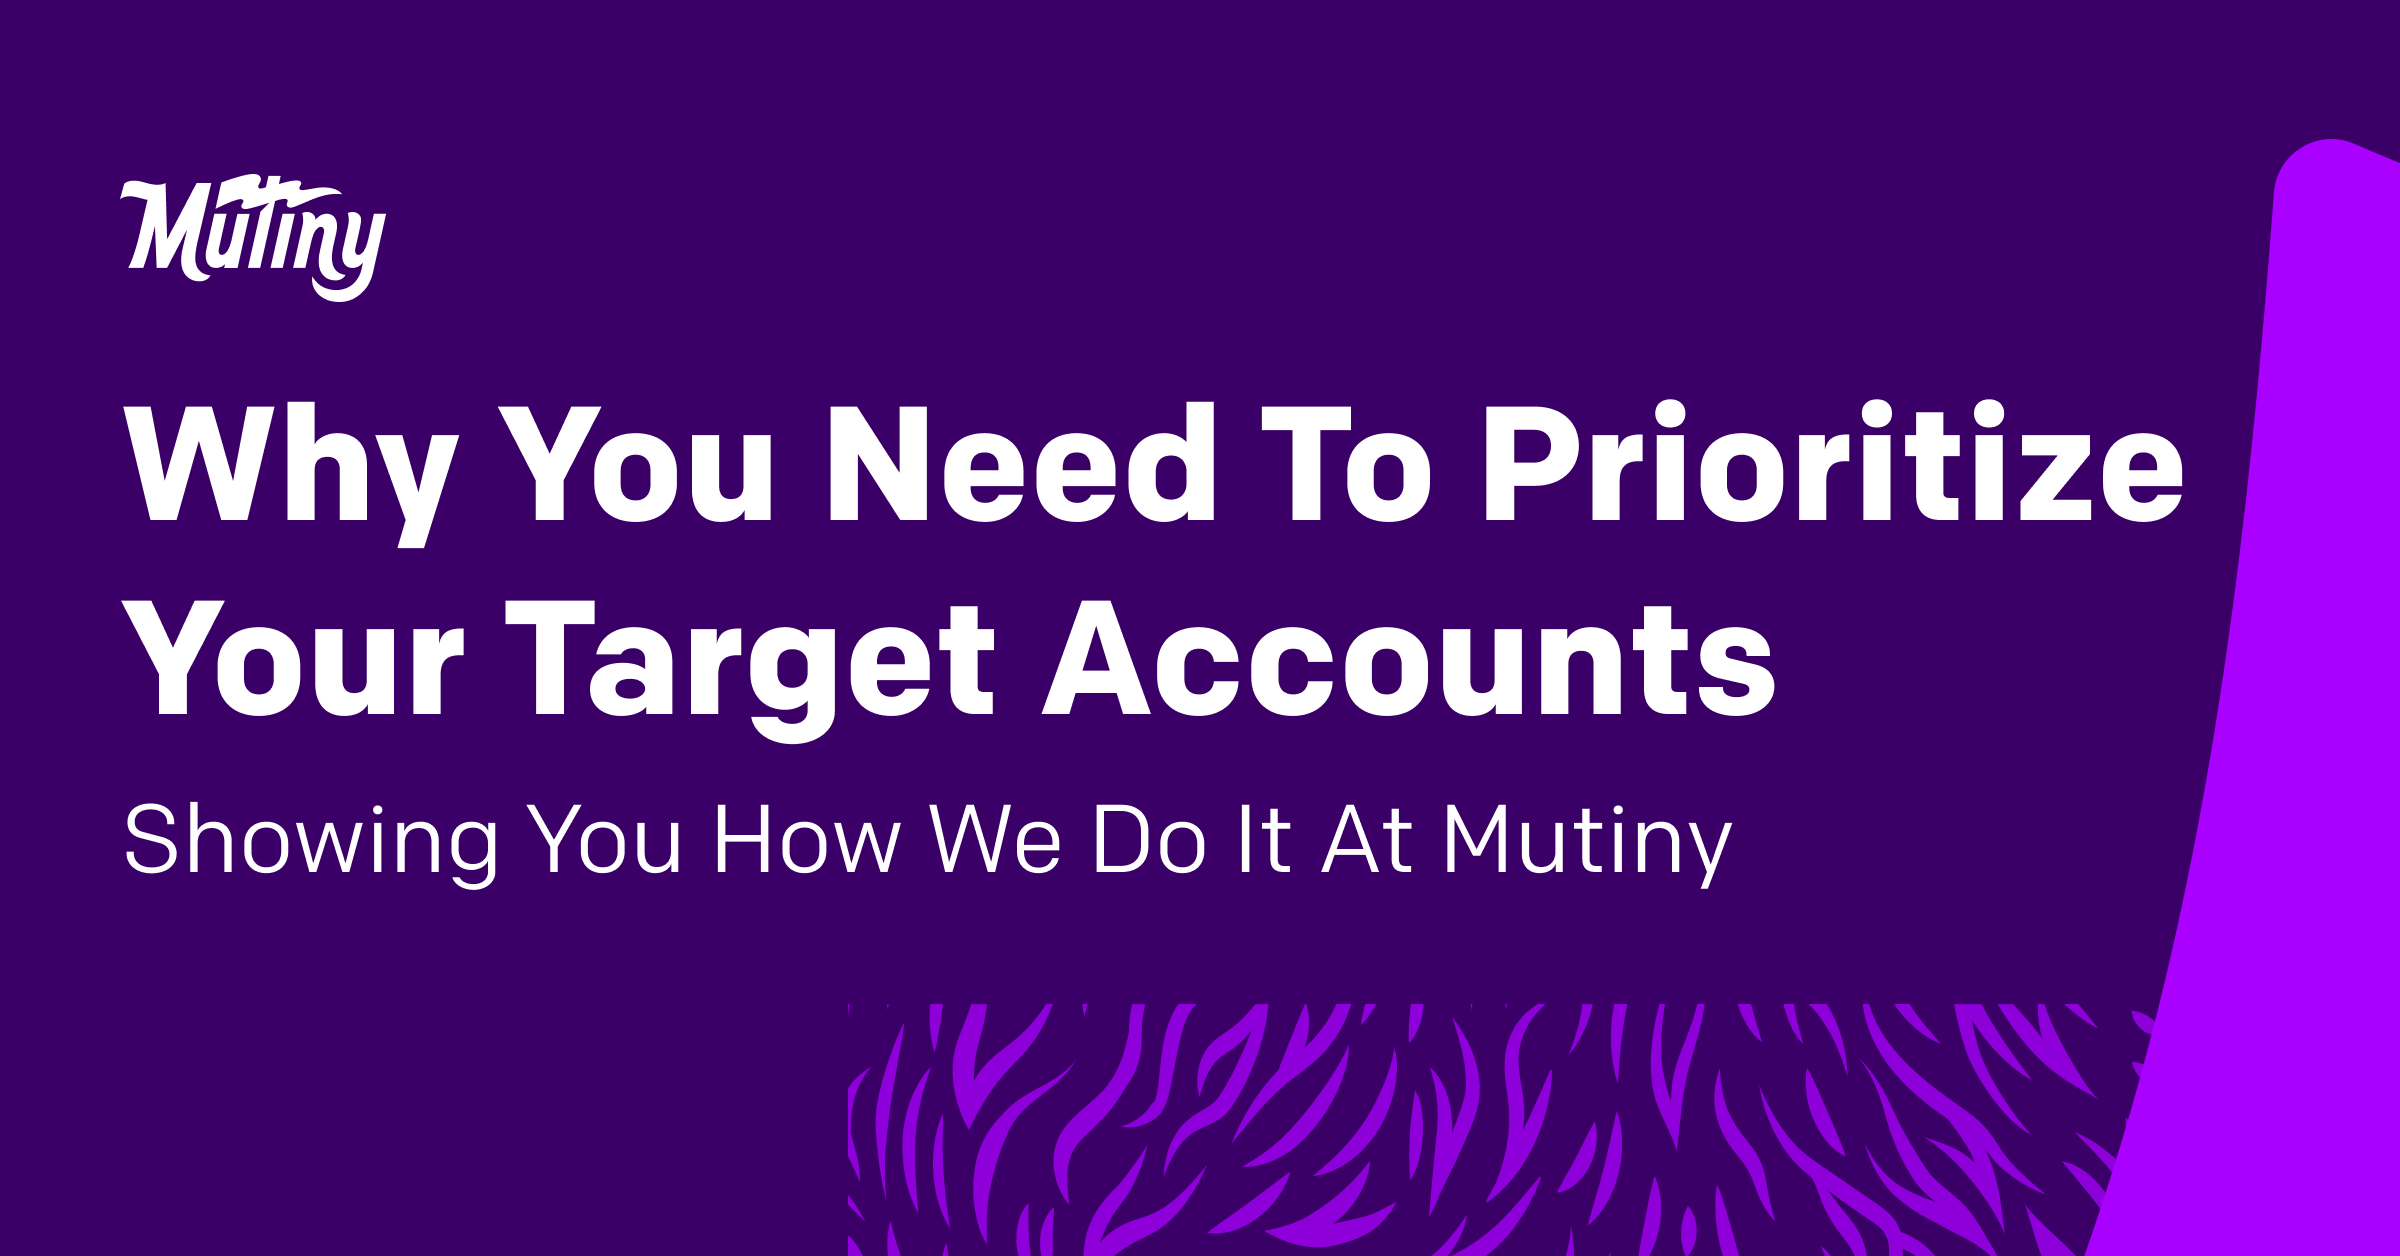 Why You Need To Prioritize Your Target Accounts (and How We Do It At Mutiny)